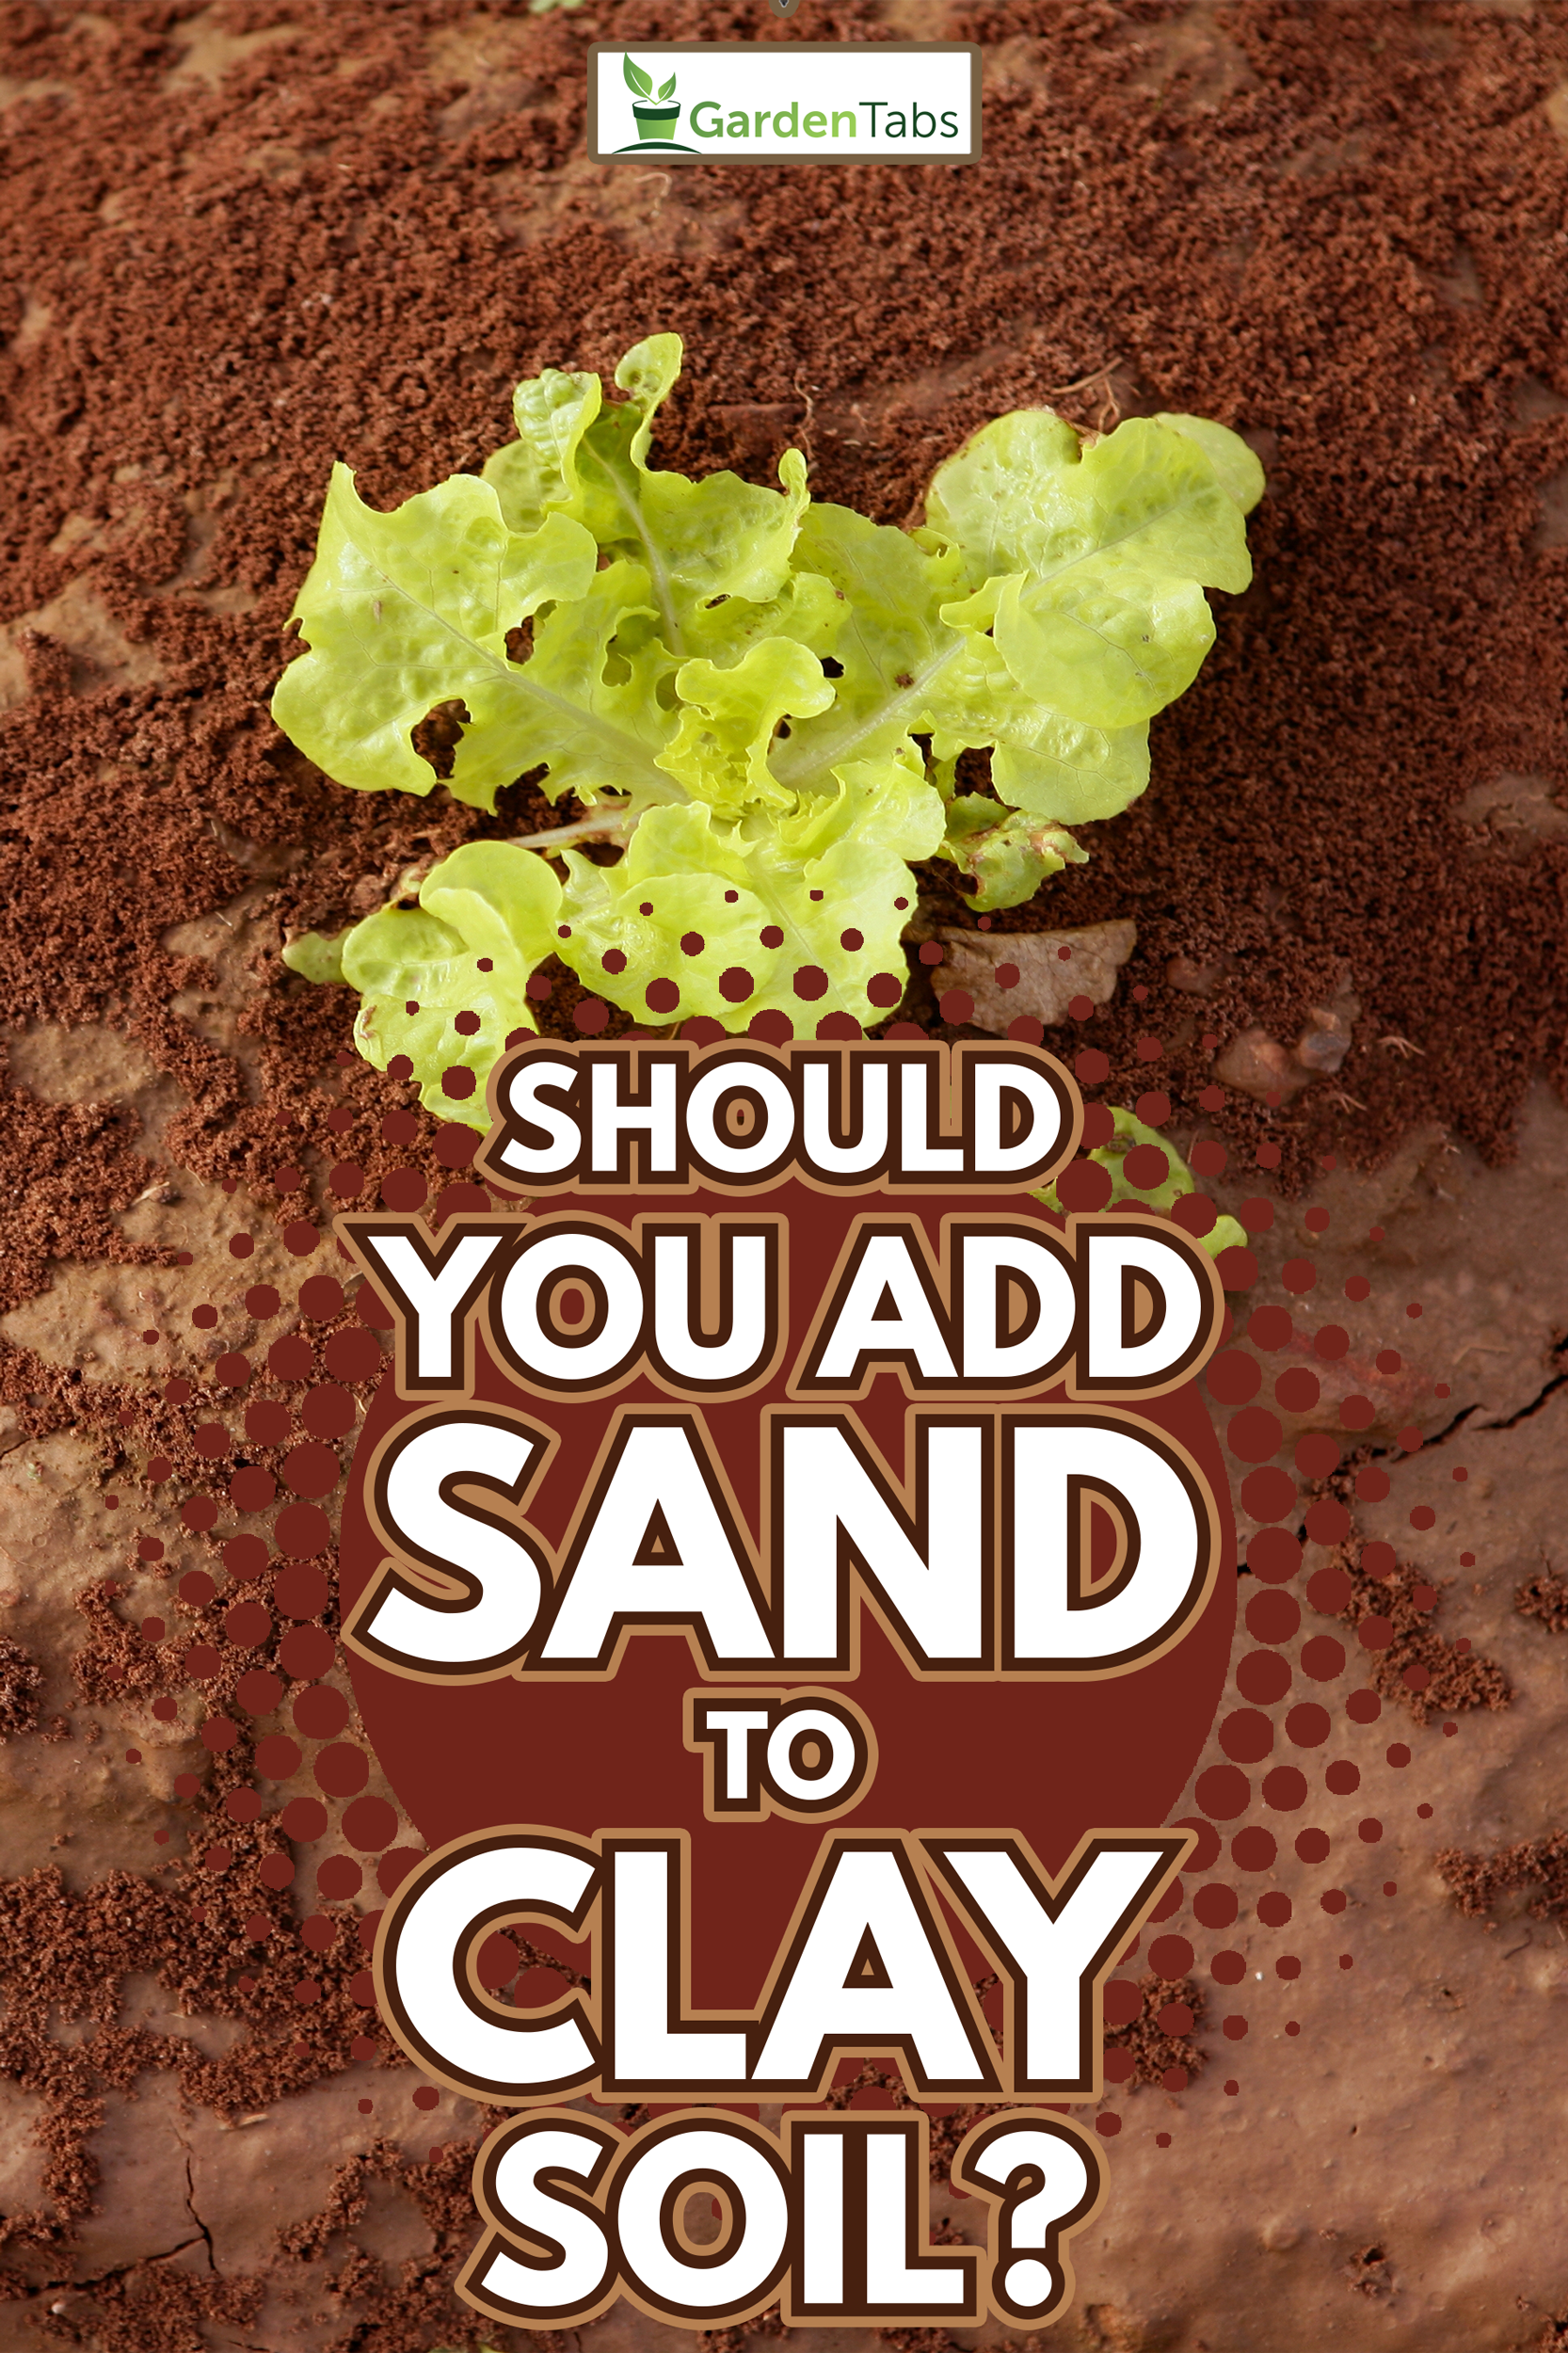 Should You Add Sand To Clay Soil?